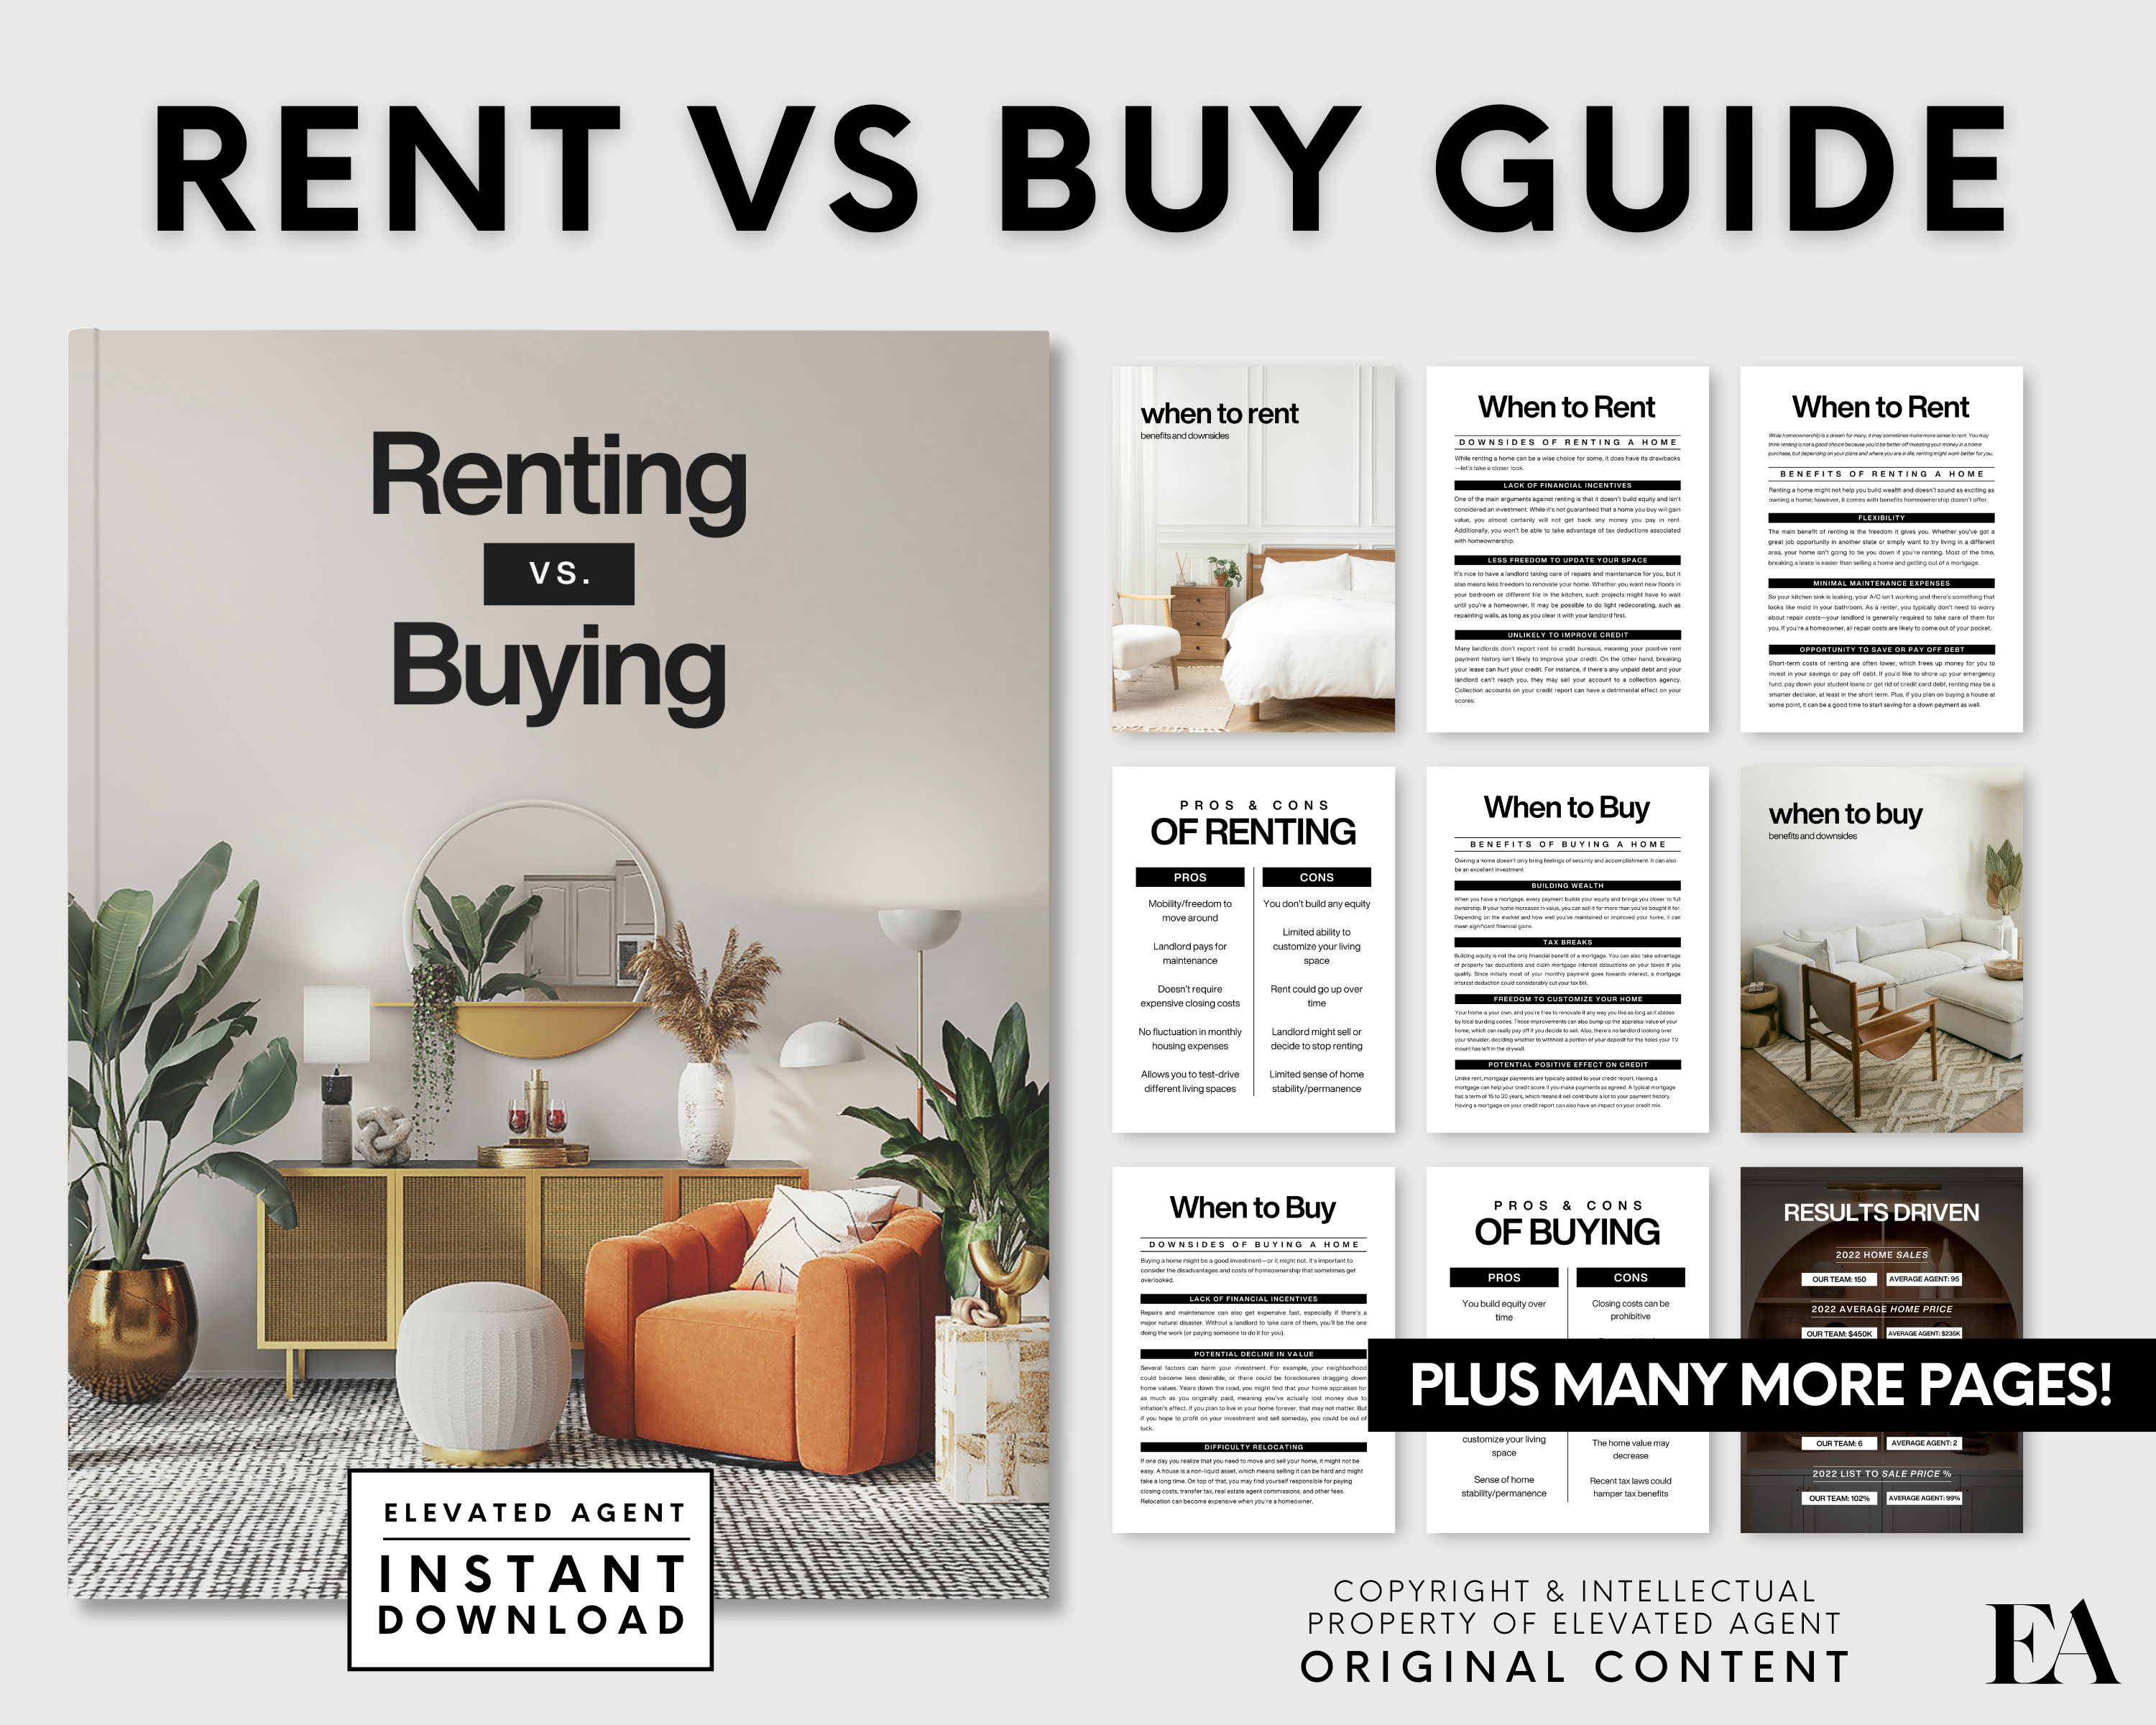 Real Estate Renting Vs. Buying Guide, Real Estate Marketing, Home Buyer Guide, Real Estate Template, Realtor Flyer, Rental Property, Canva Template